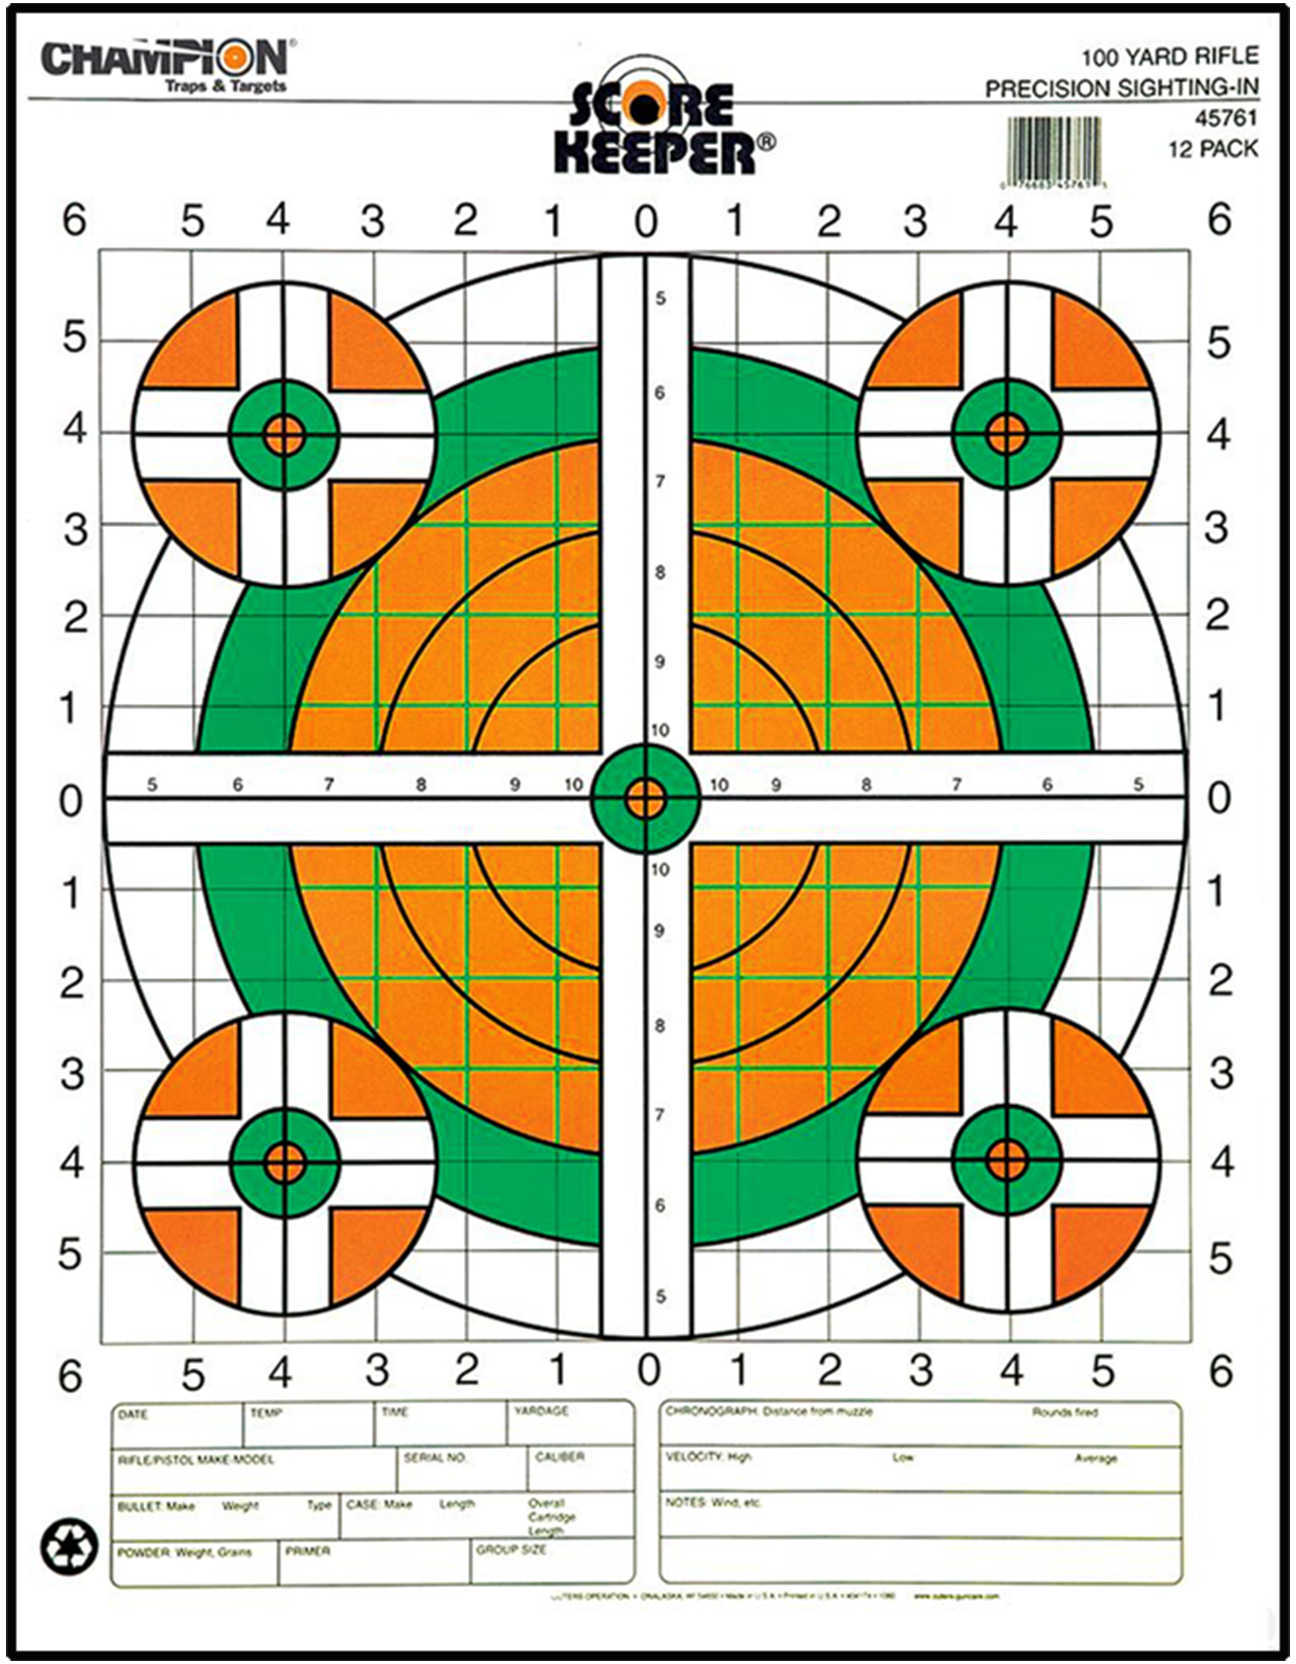 Champion Traps And Targets Scorekeeper Paper - Fluorescent Orange & Green Bull 100 Yd. Rifle Sight-In 14" X 18